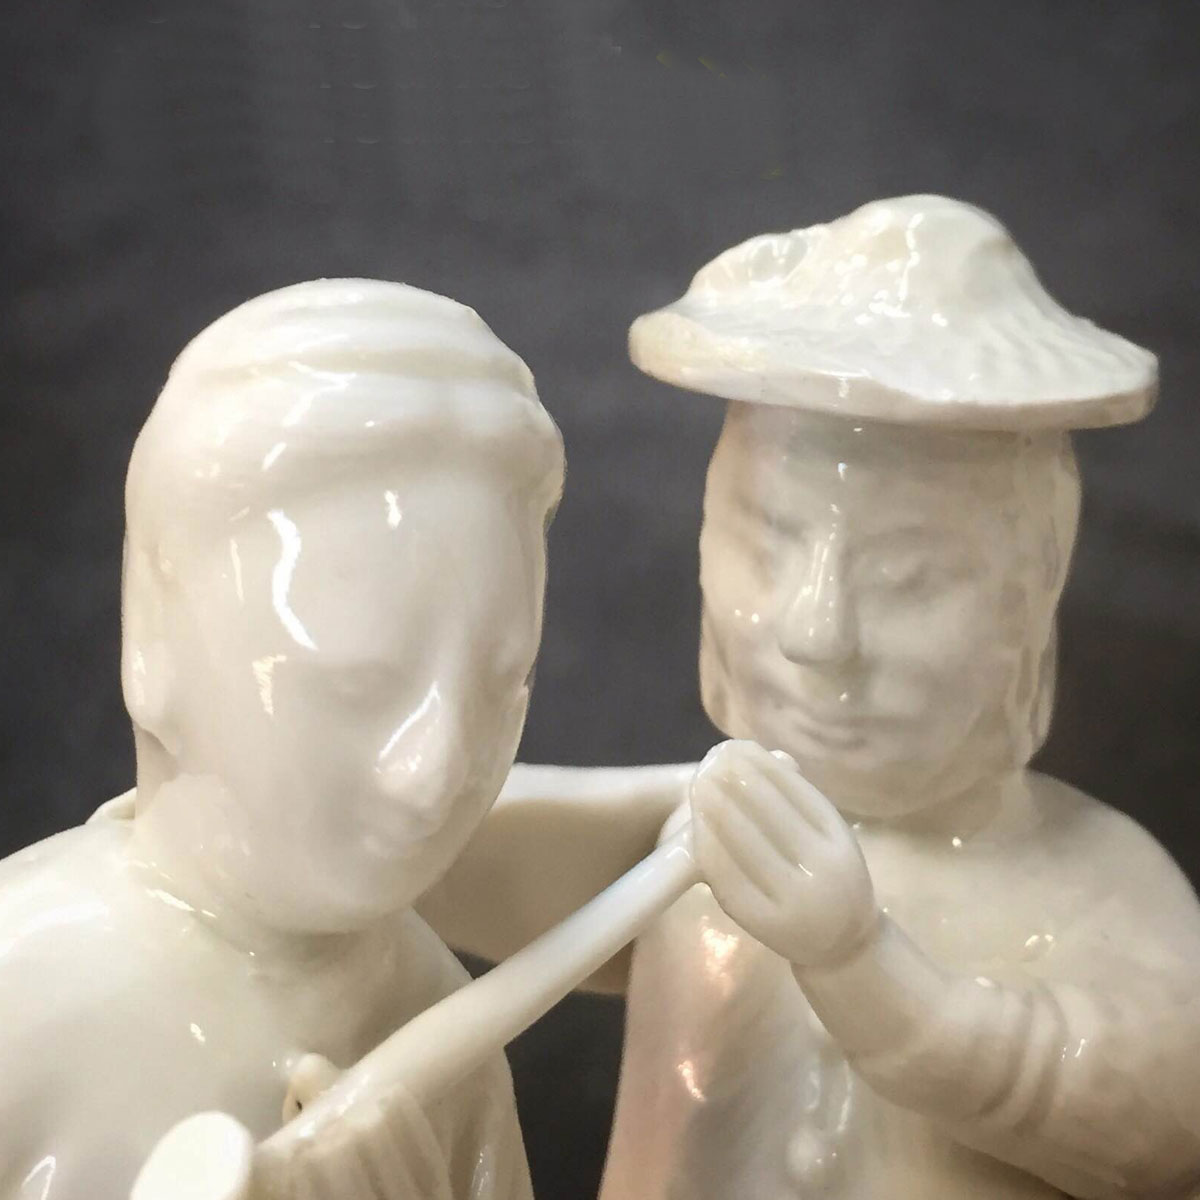 Two white ceramic figures, one with a pipe